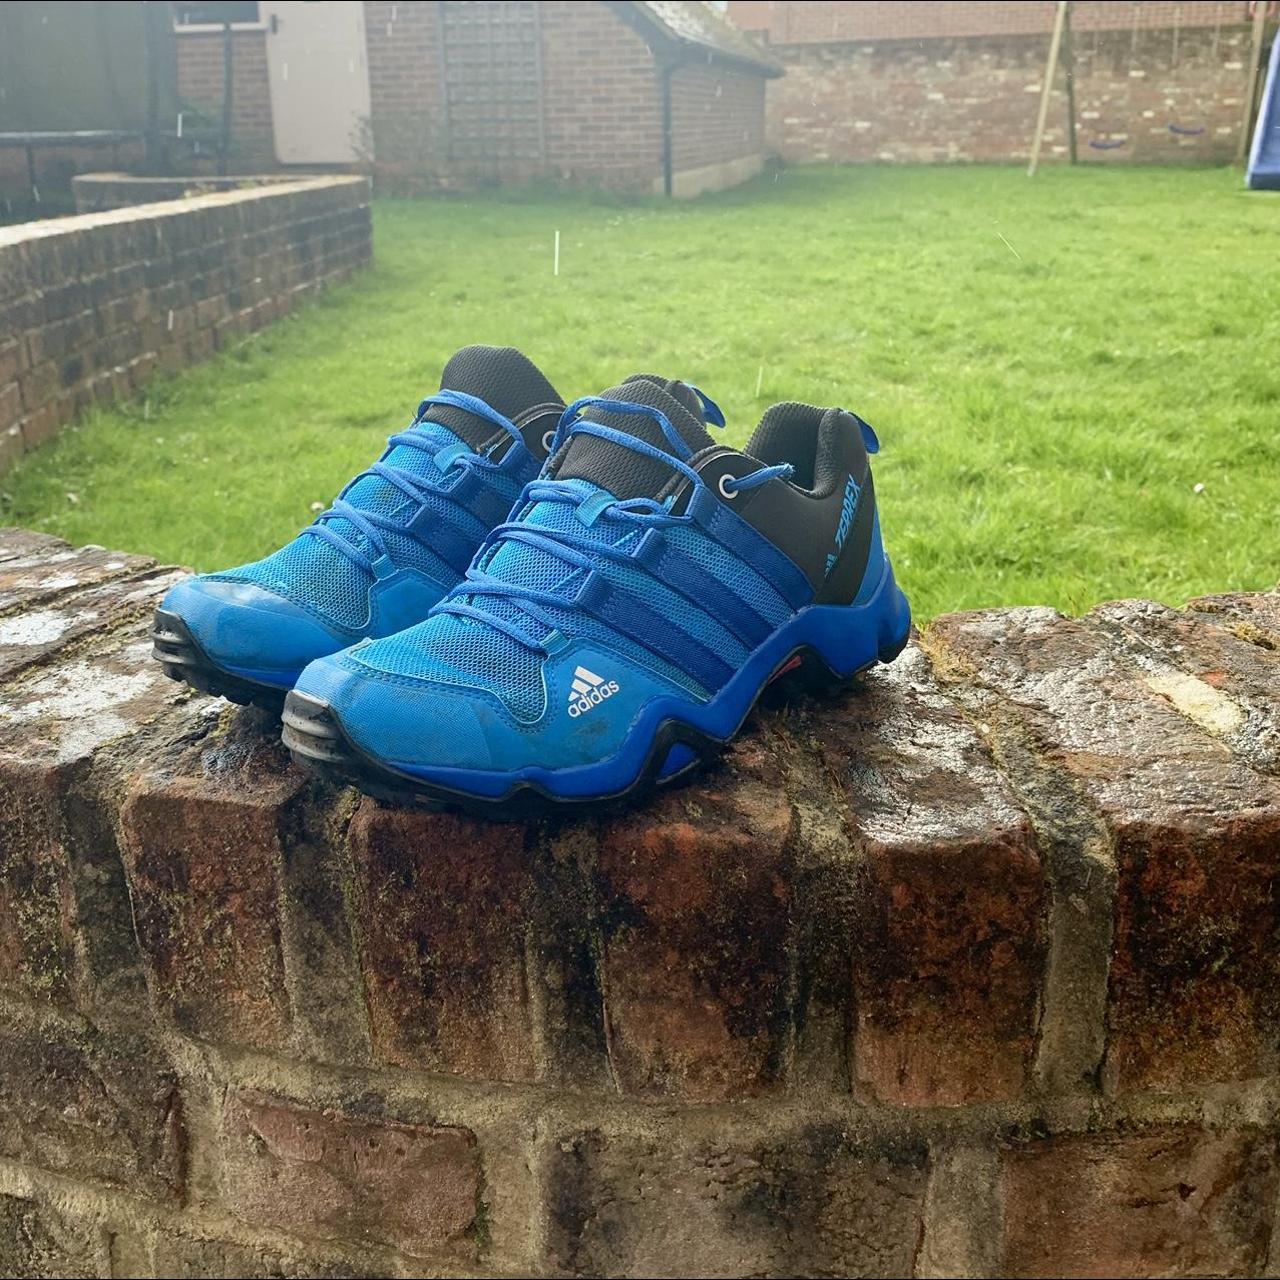 Walking boots adidas Blue Good condition Size 5 - Depop